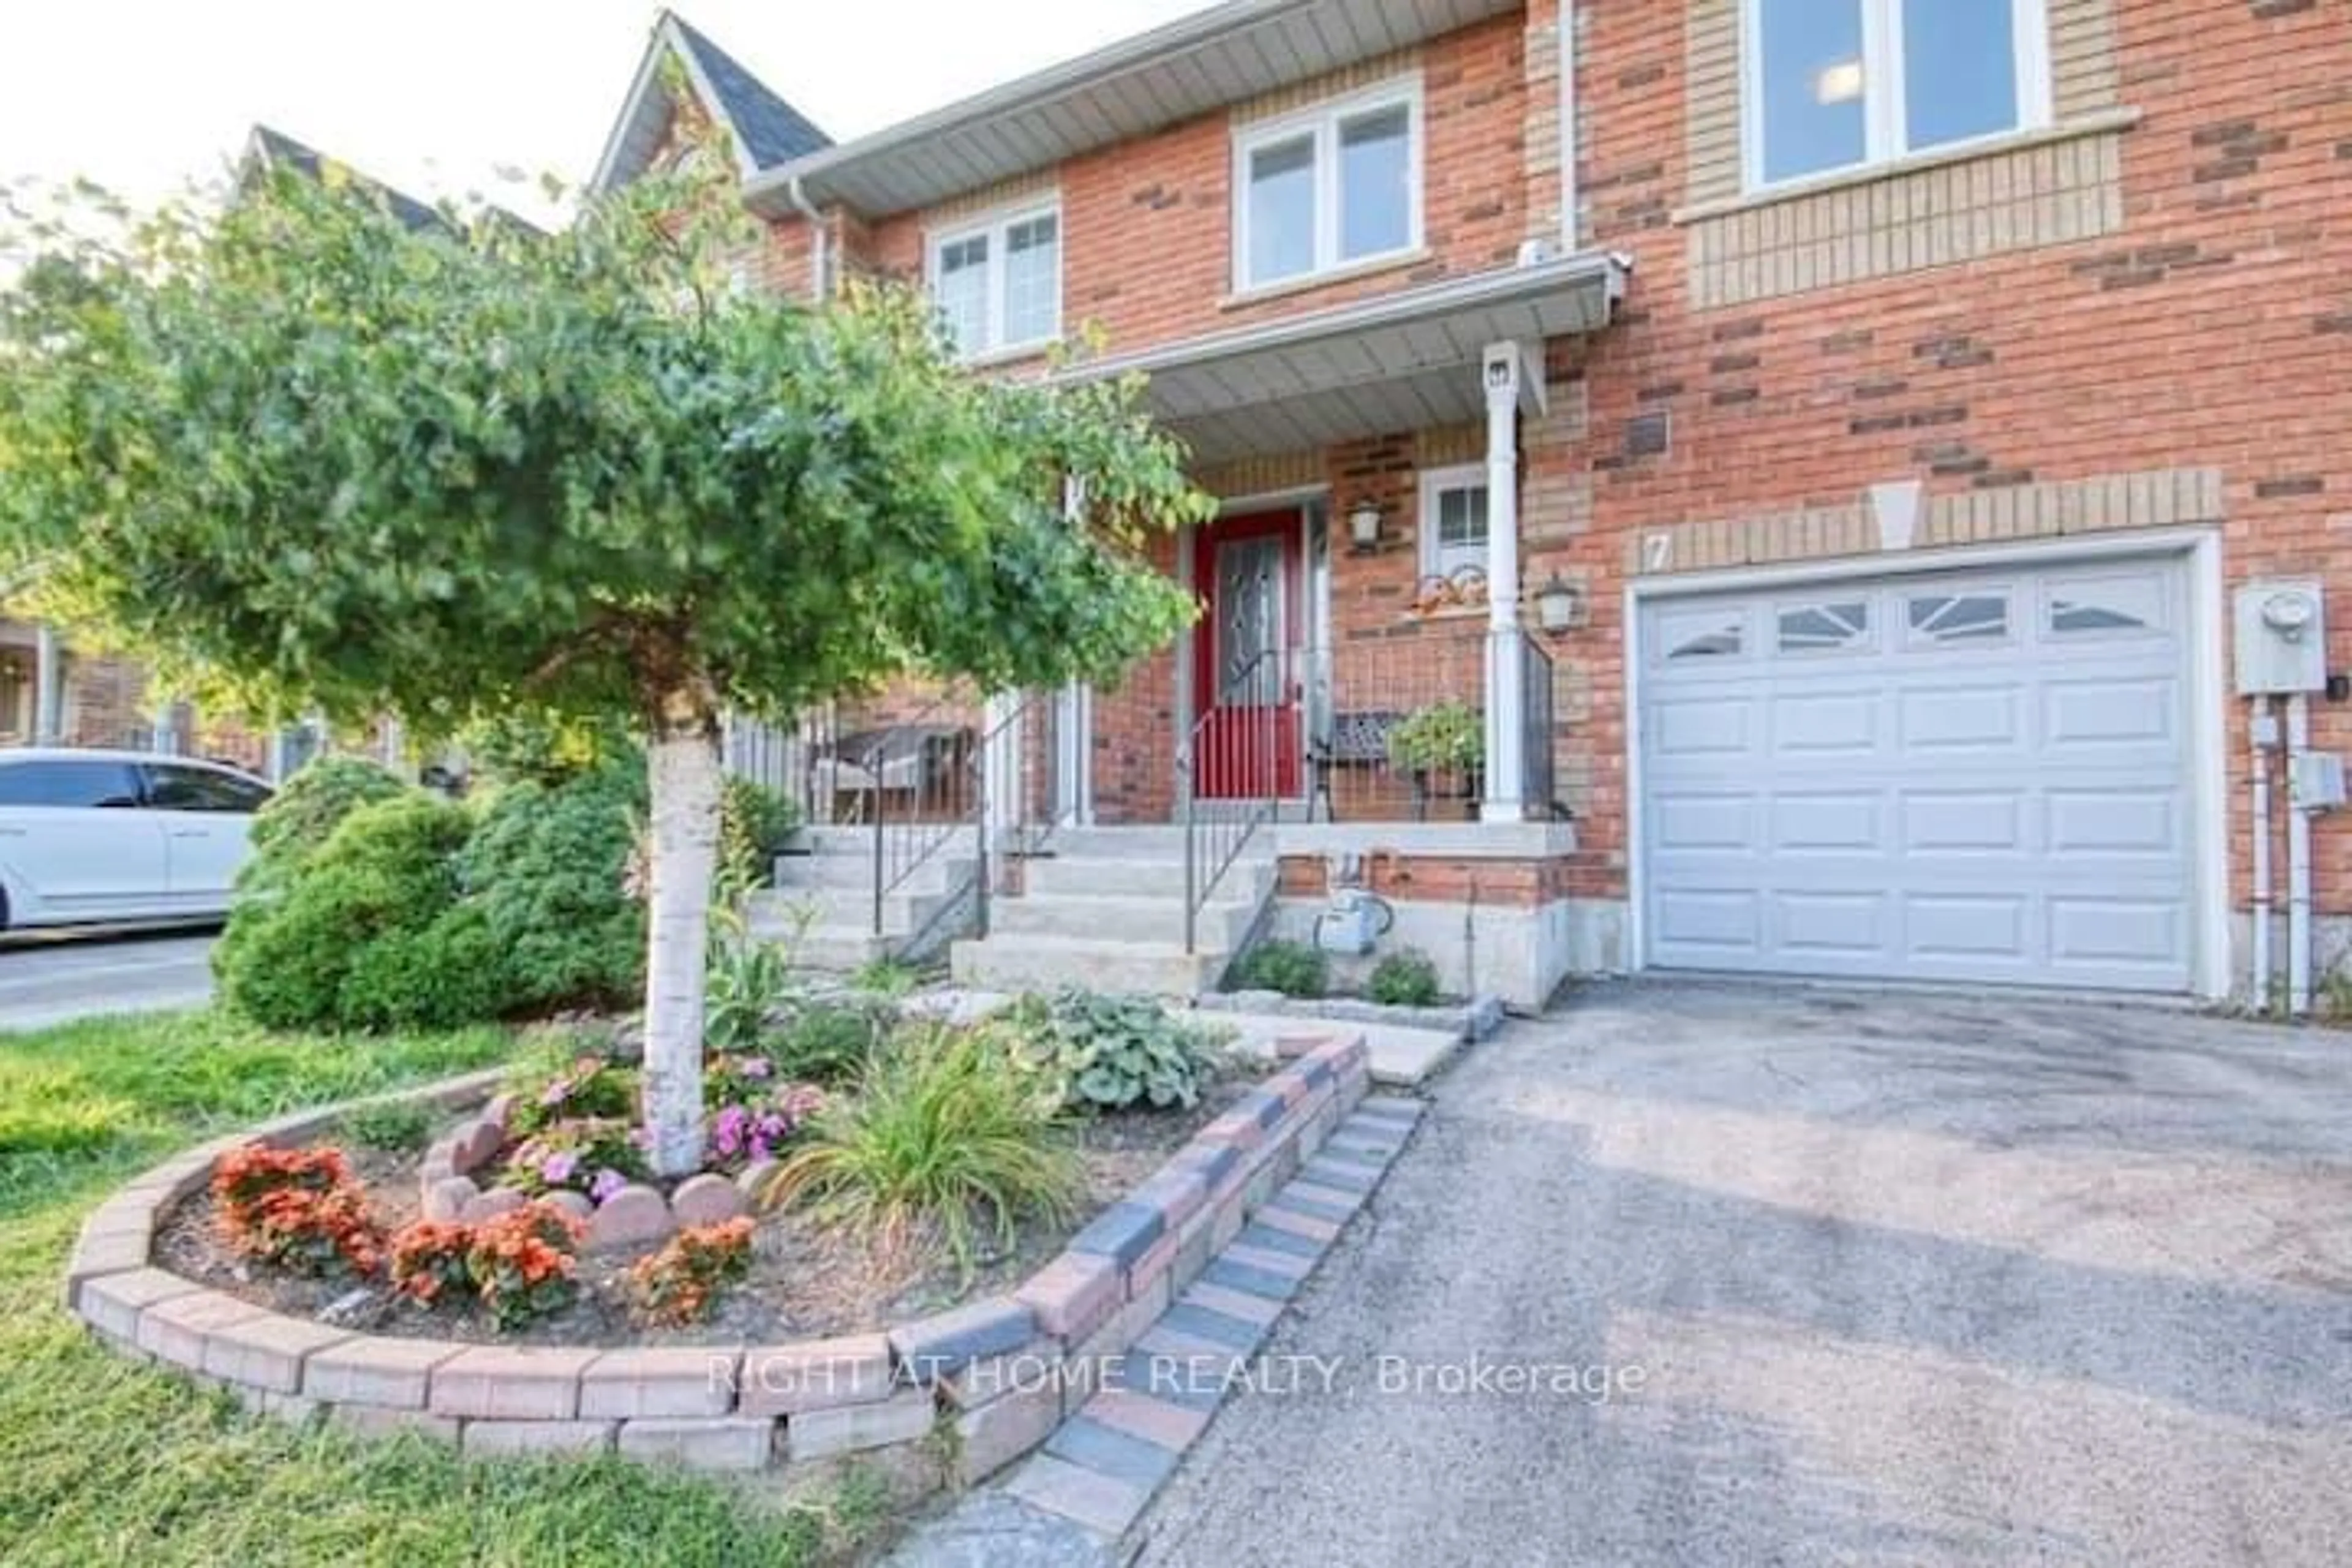 Home with brick exterior material for 7 Silverdart Cres, Richmond Hill Ontario L4E 3T7